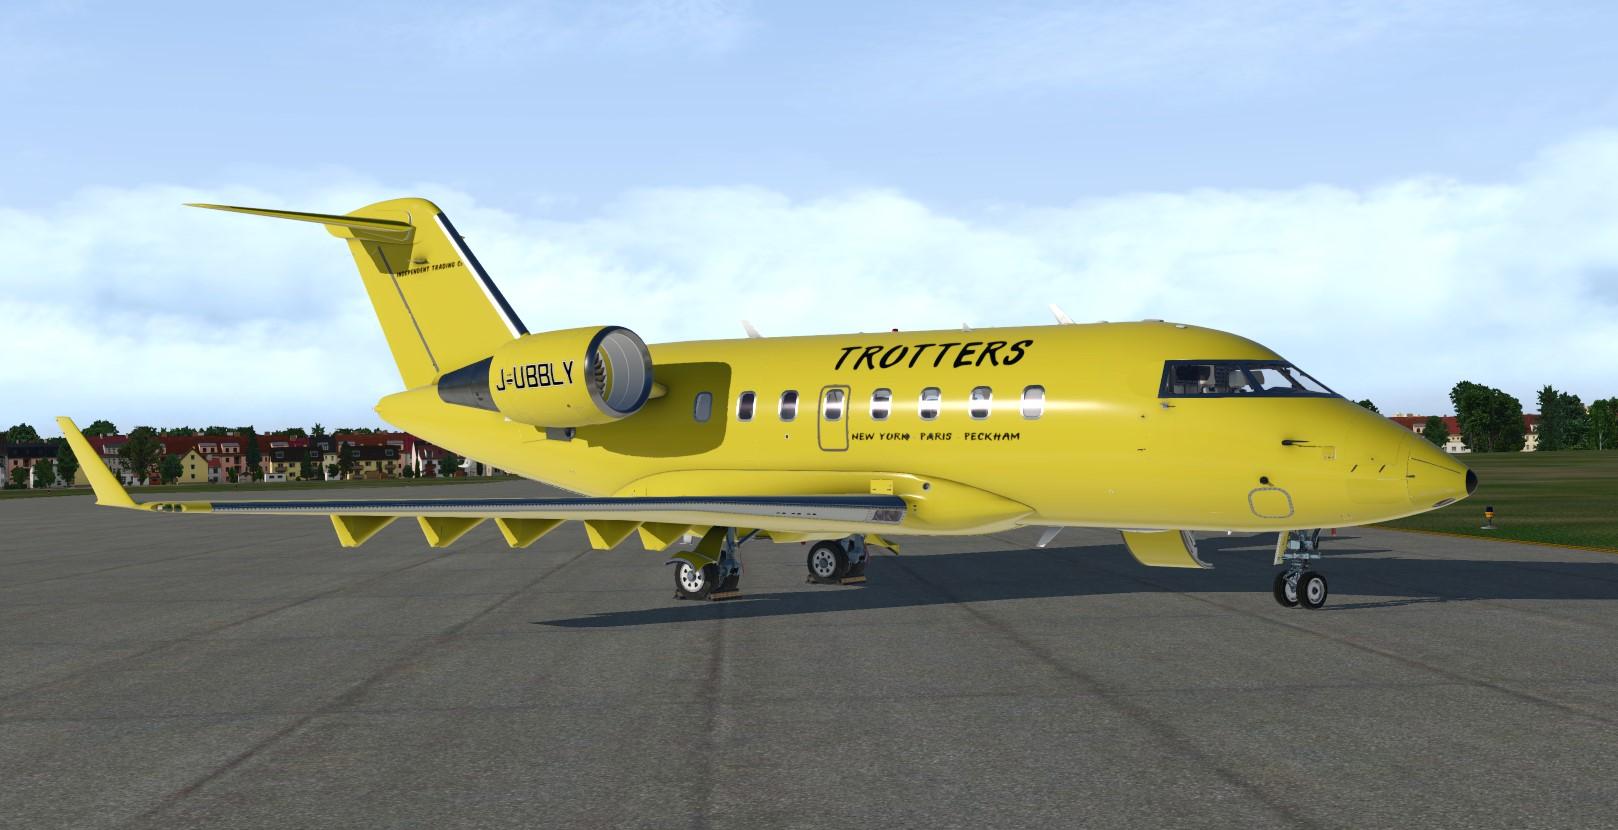 Trotter's Private Jet (Clean)